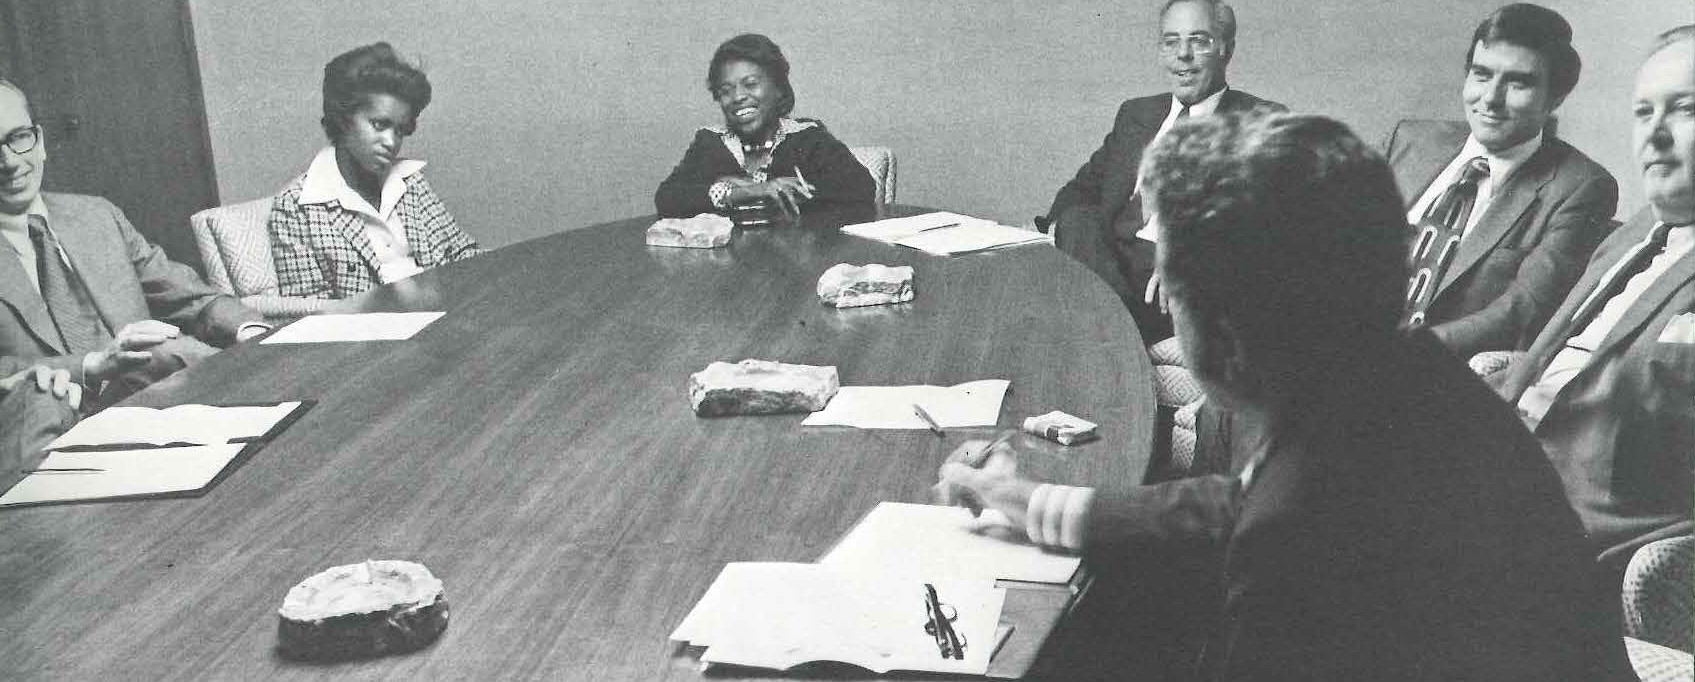 A group of men and women sit around an oval table listening while Fernando Guzman speaks.